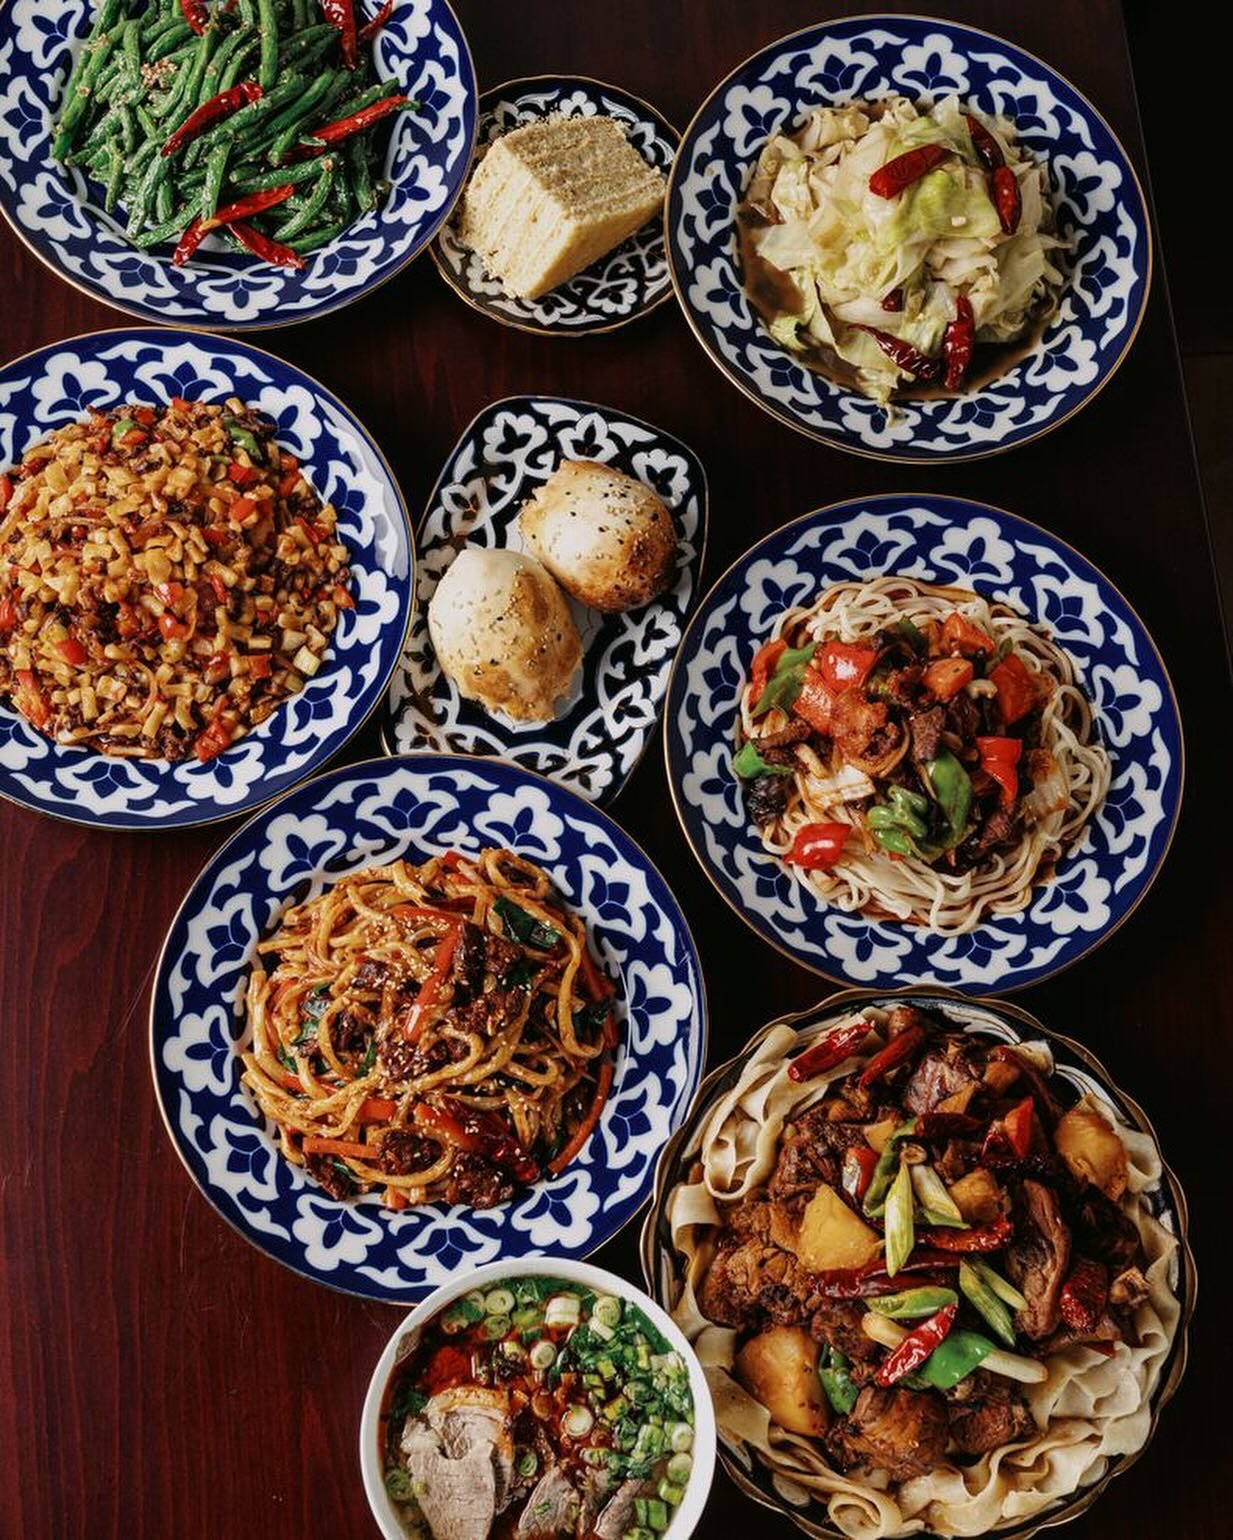 Caravan Uyghur Cuisine (@caravanuyghur) has reopened at 60 Beaver Street! You can find Mr. Bakri and his family serving traditional Ugyhur dishes, including big tray chicken, hand pulled noodles, and beef samsa, at their new location.

@welcome.to.ch